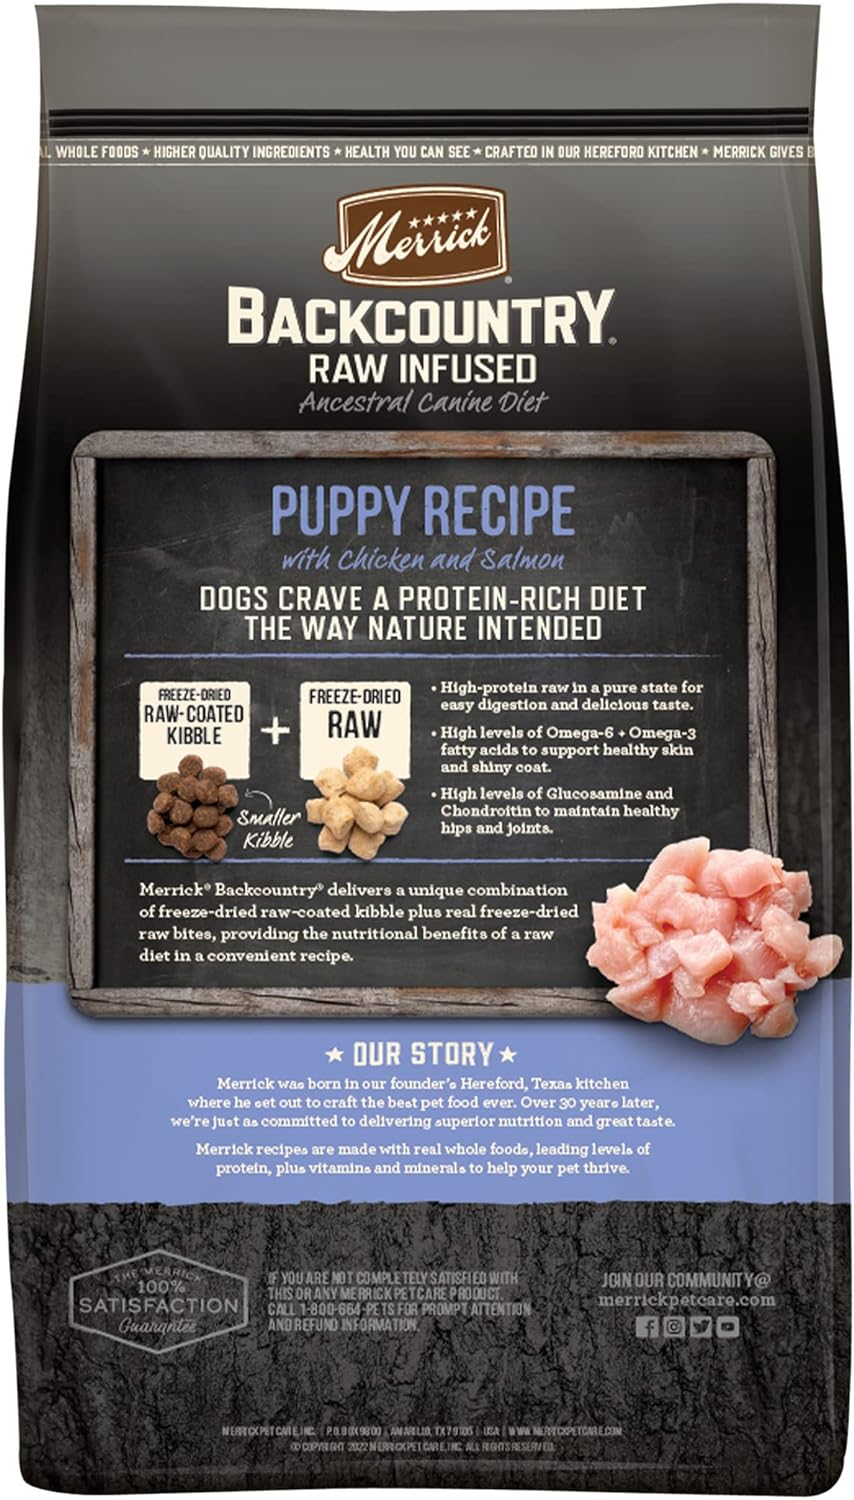 Merrick Backcountry Raw Infused Puppy Recipe Dry Dog Food – Gallery Image 5